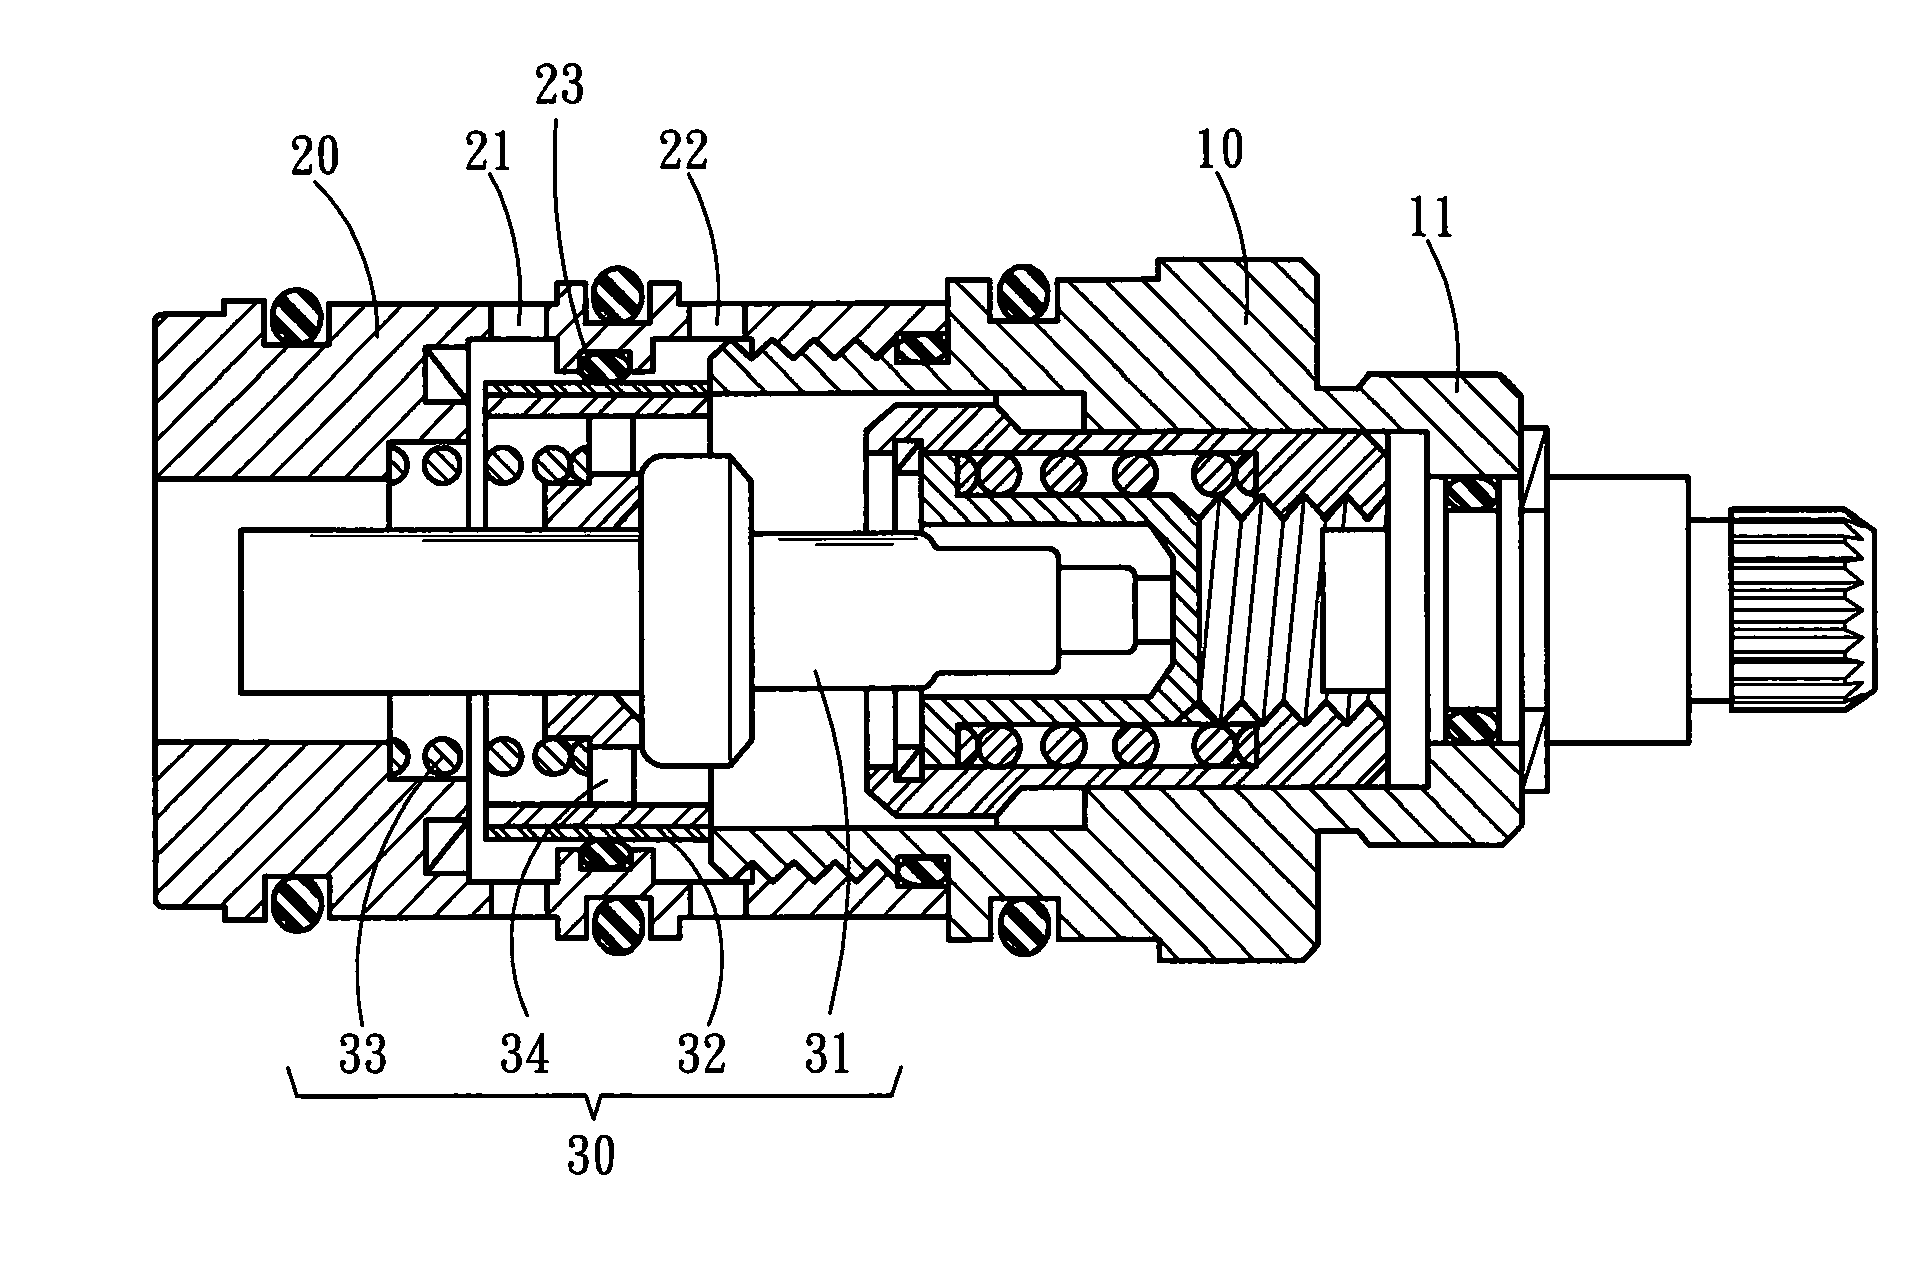 Thermostatic valve control structure